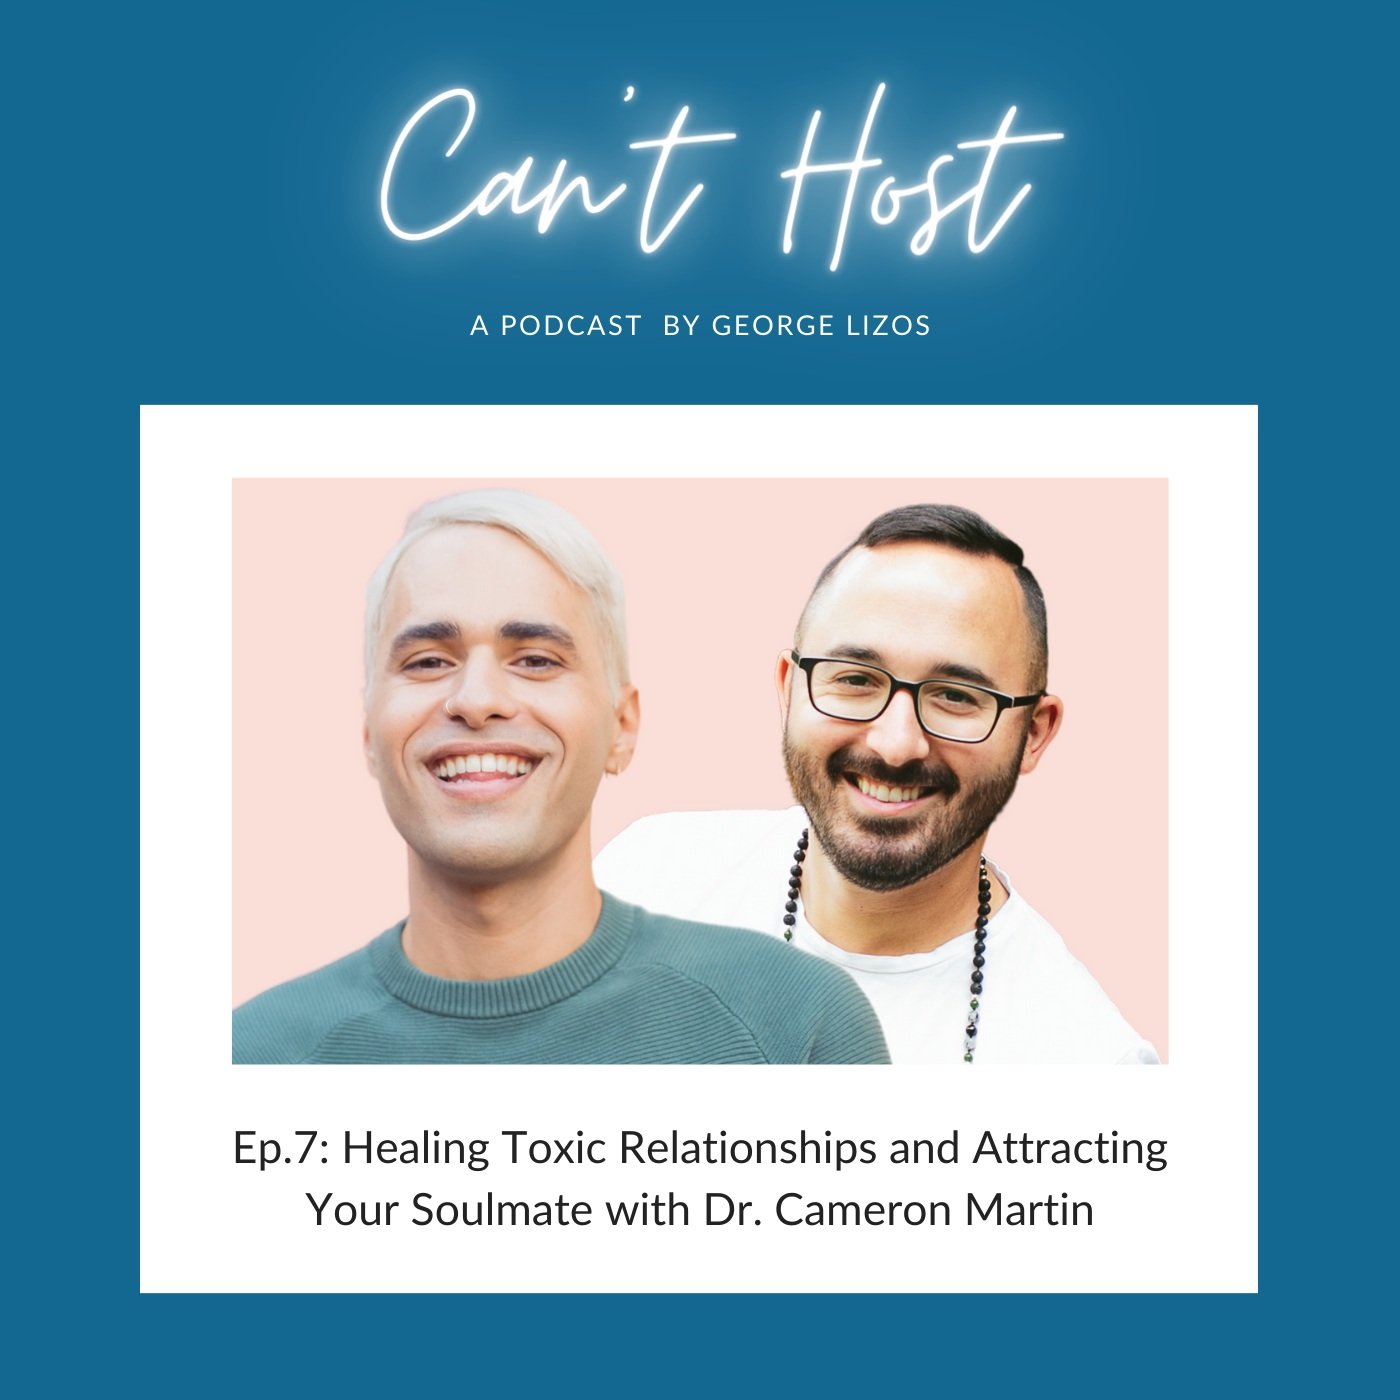 Healing Toxic Relationships and Attracting Your Soulmate with Dr. Cameron Martin